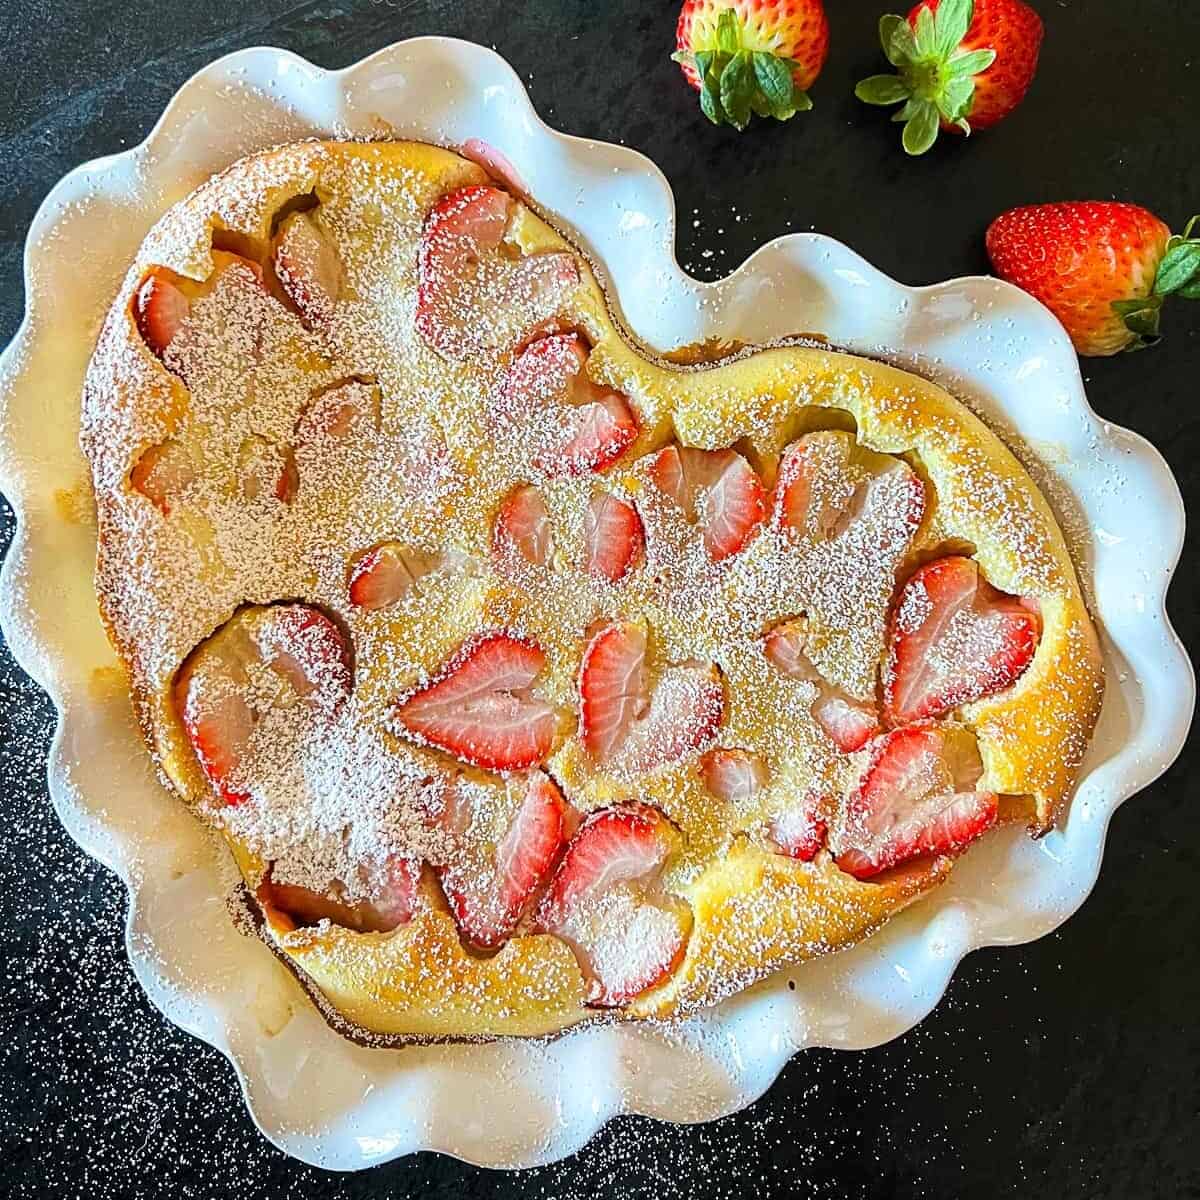 strawberry clafoutis recipe from scratch in a heart shaped pie dish with fresh strawberries sprinkled around